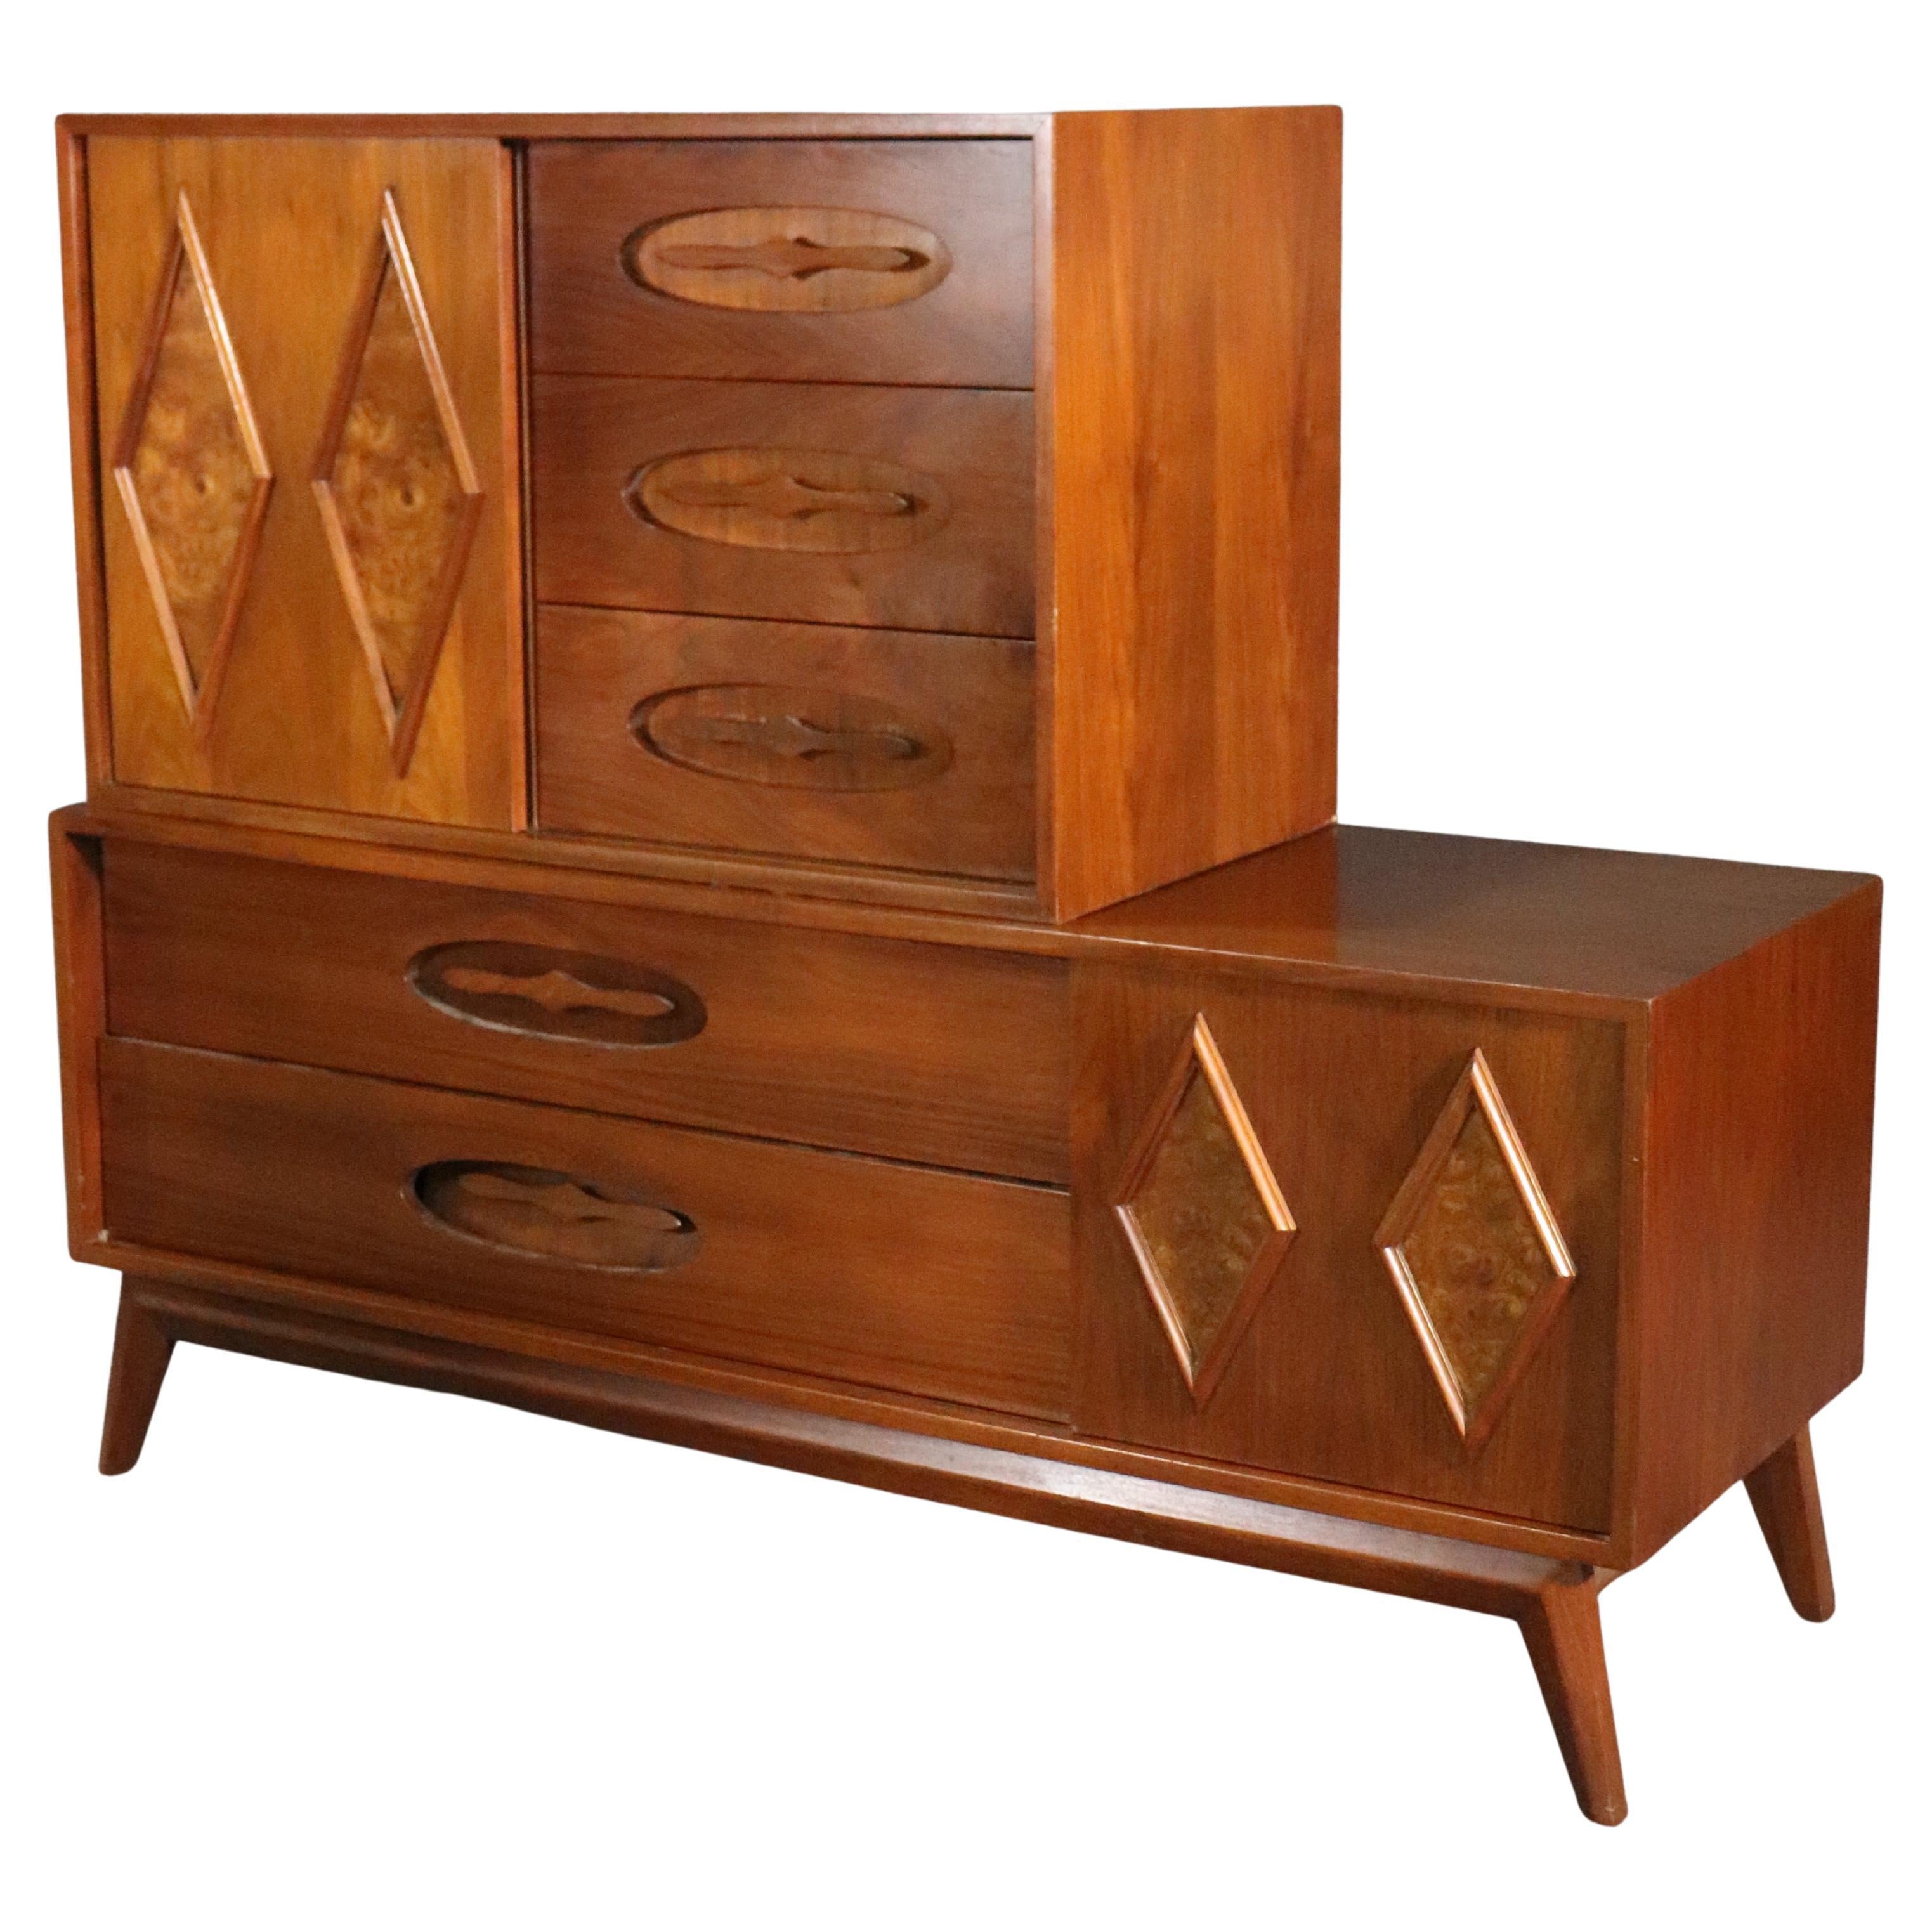 Vintage 2-Piece Diamond Dresser by Young Manufacturing For Sale